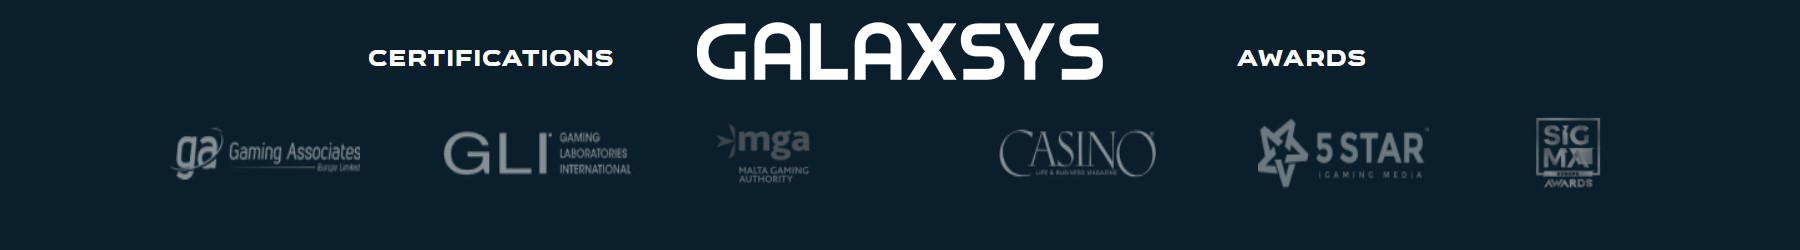 Galaxsys Awards and certifications